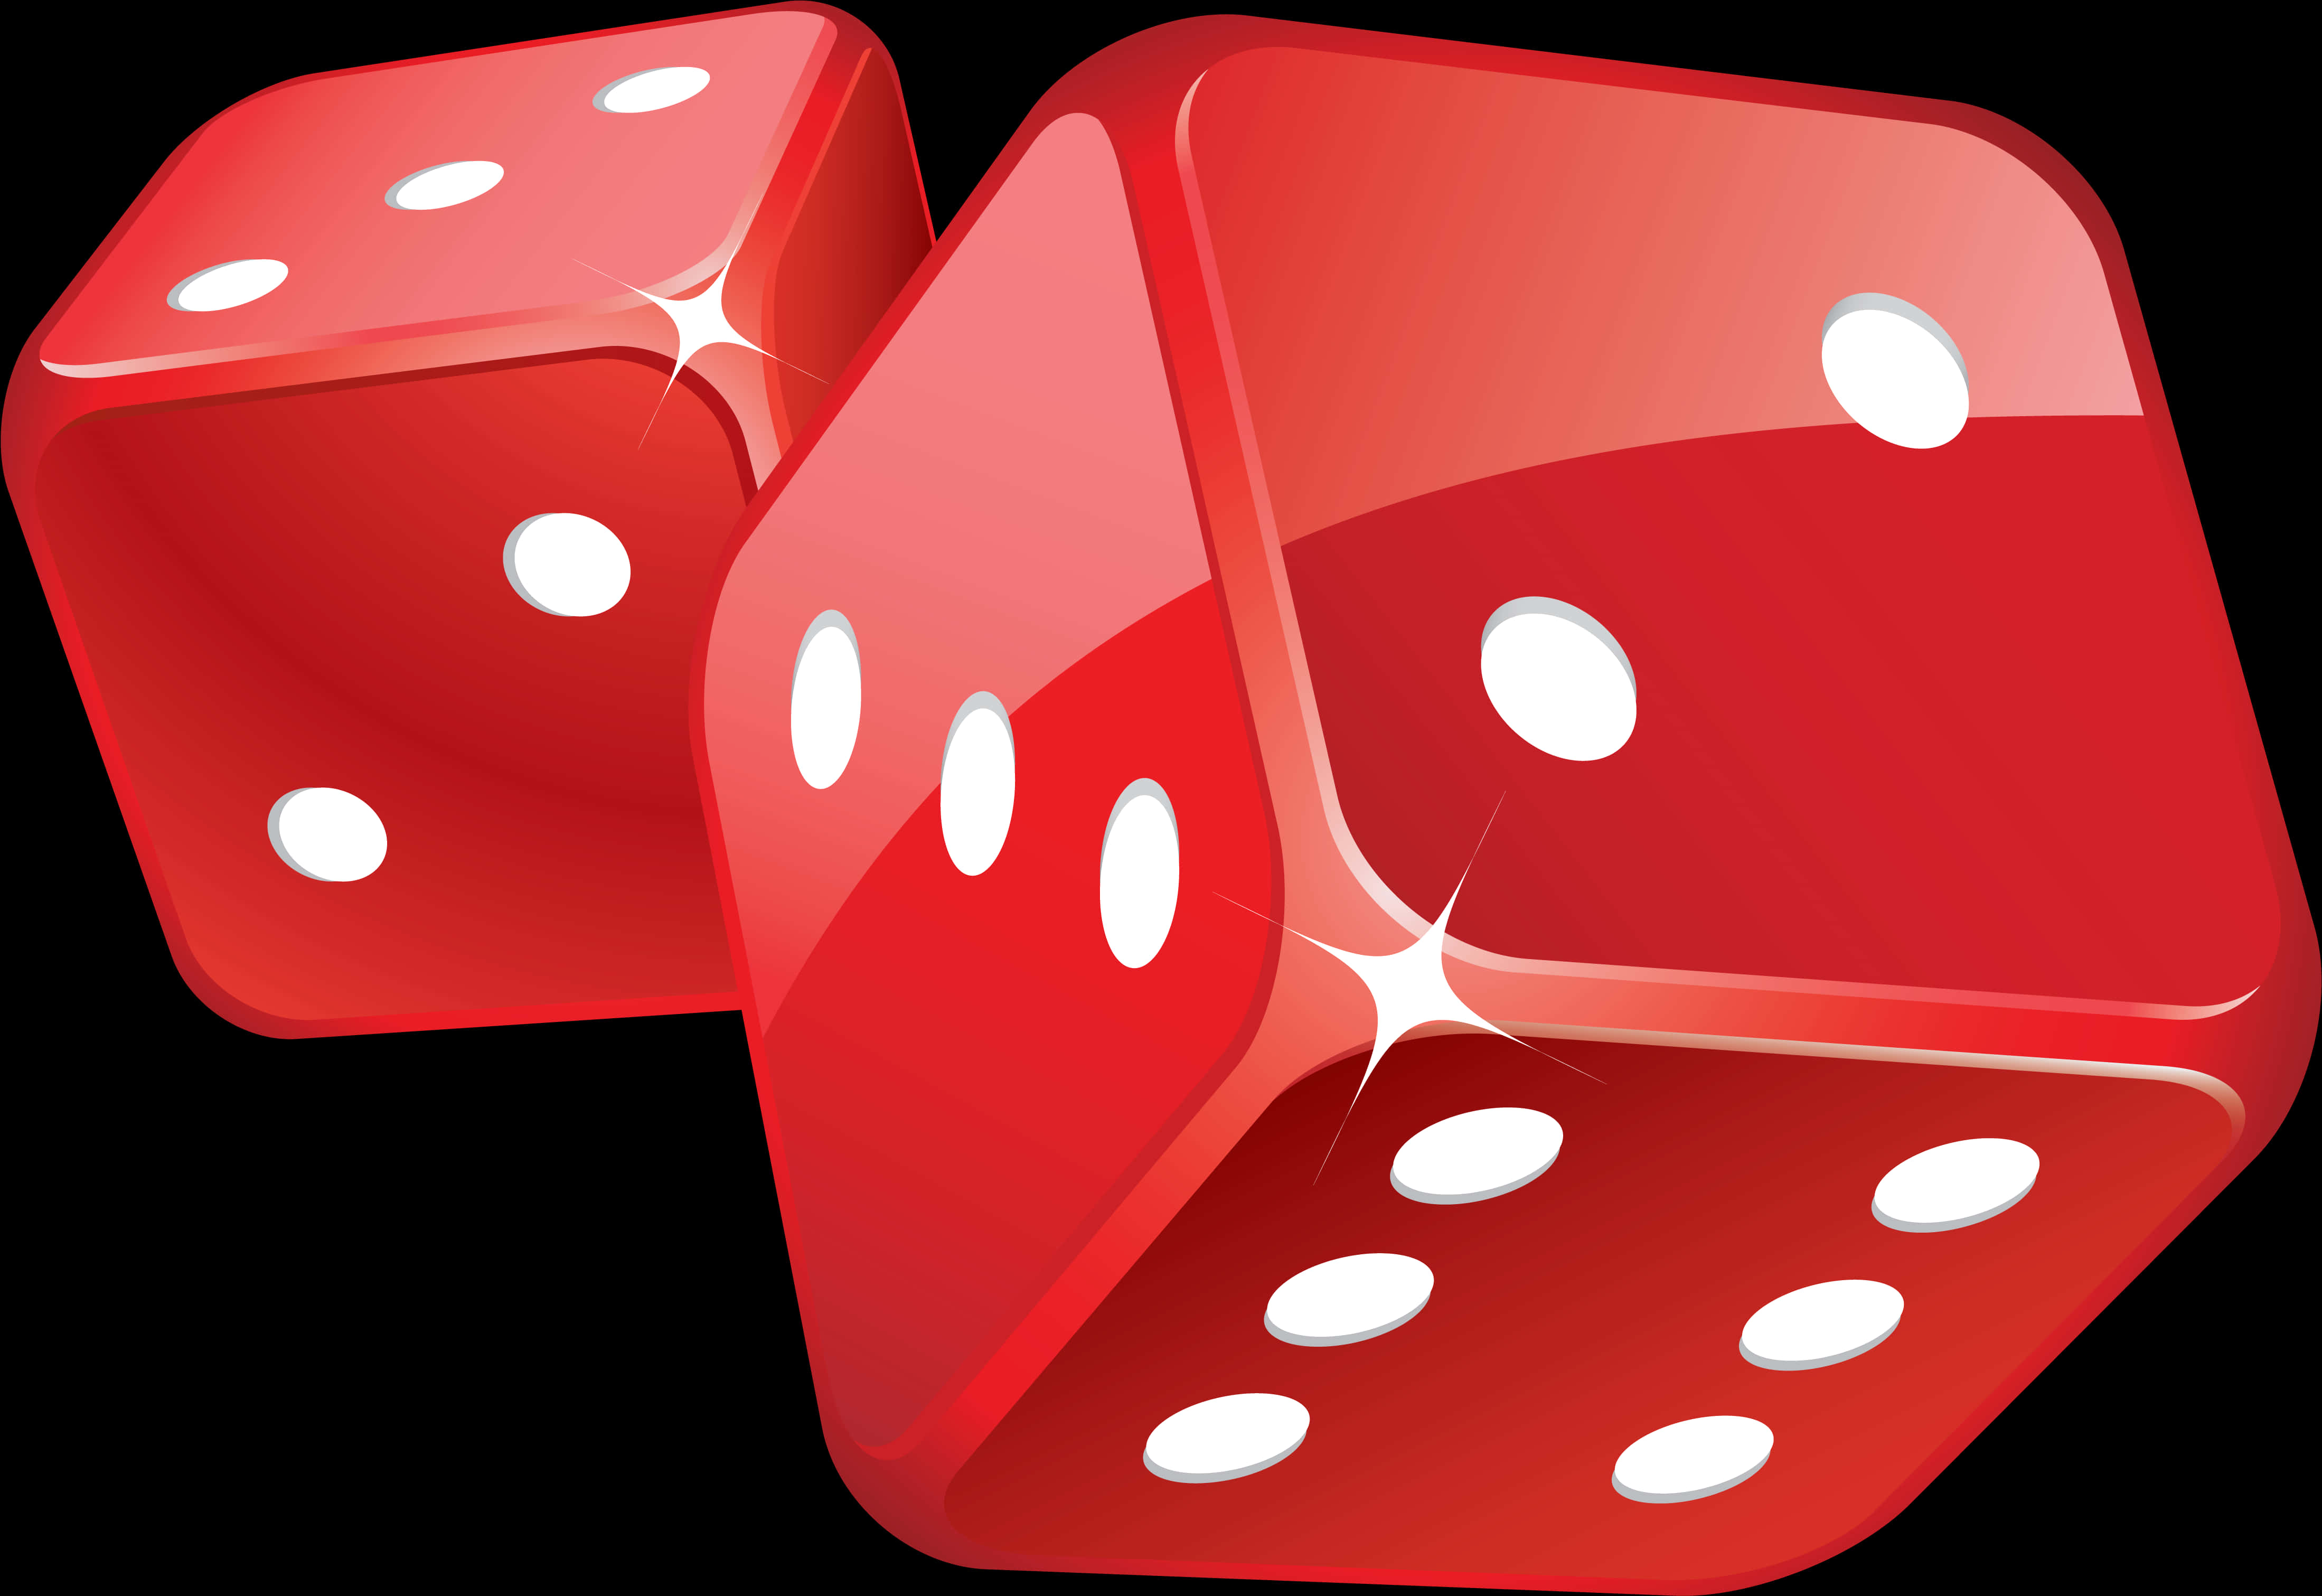 A Pair Of Red Dice